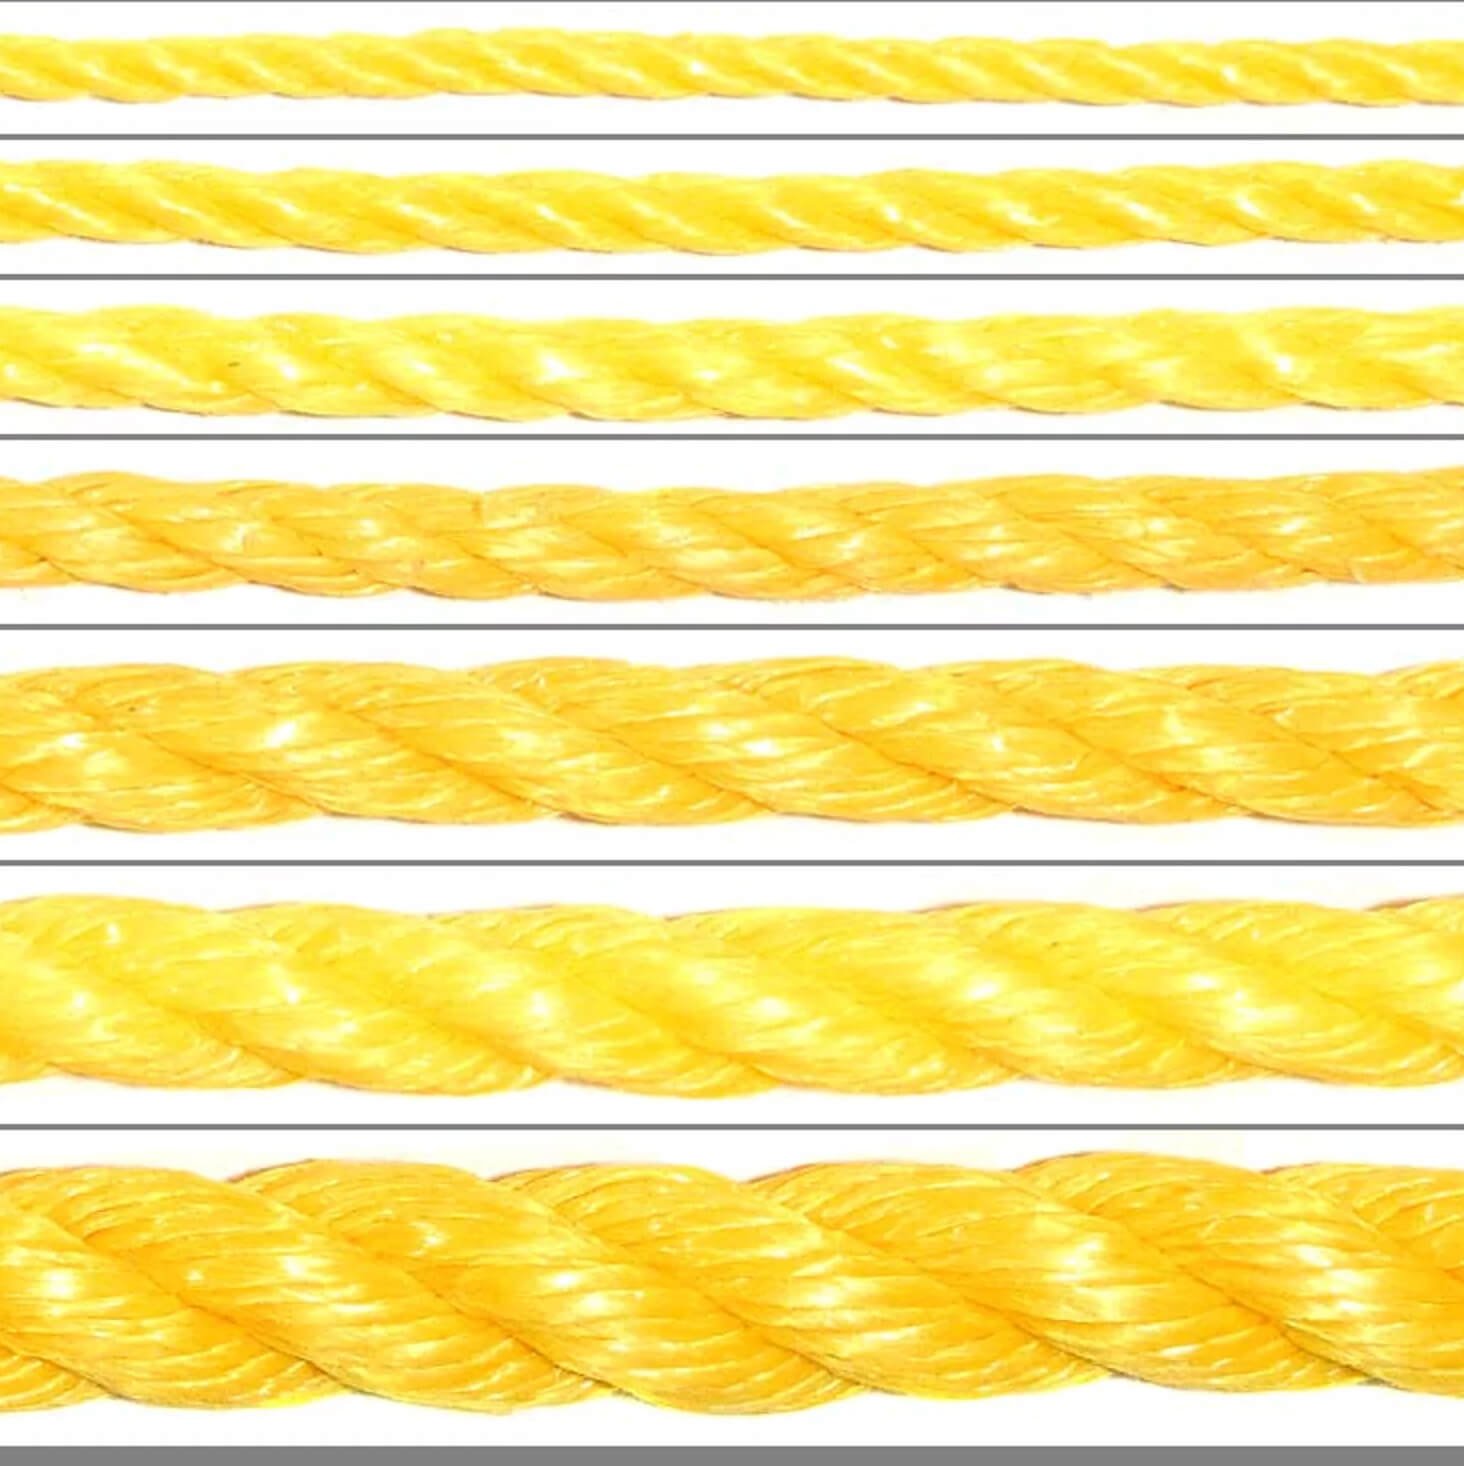 synthetic rope in different sizes